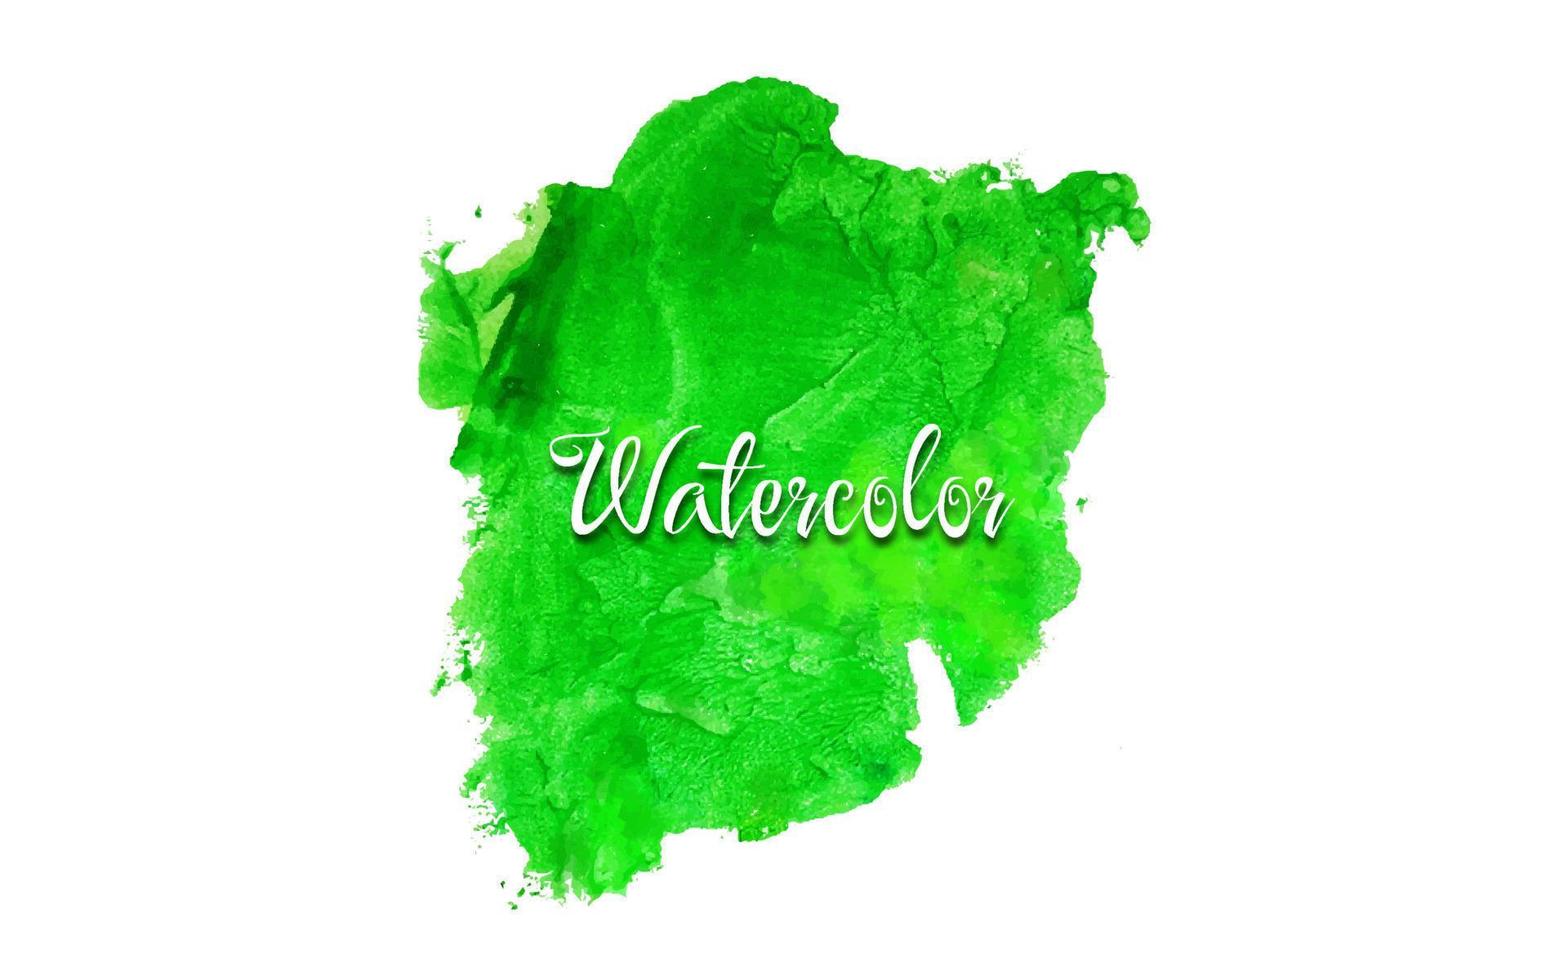 Green watercolor stroke background with paint splash texture effect style. Graphic design template element with brush concept for banner, flyer, card, brochure cover, social media post, etc vector